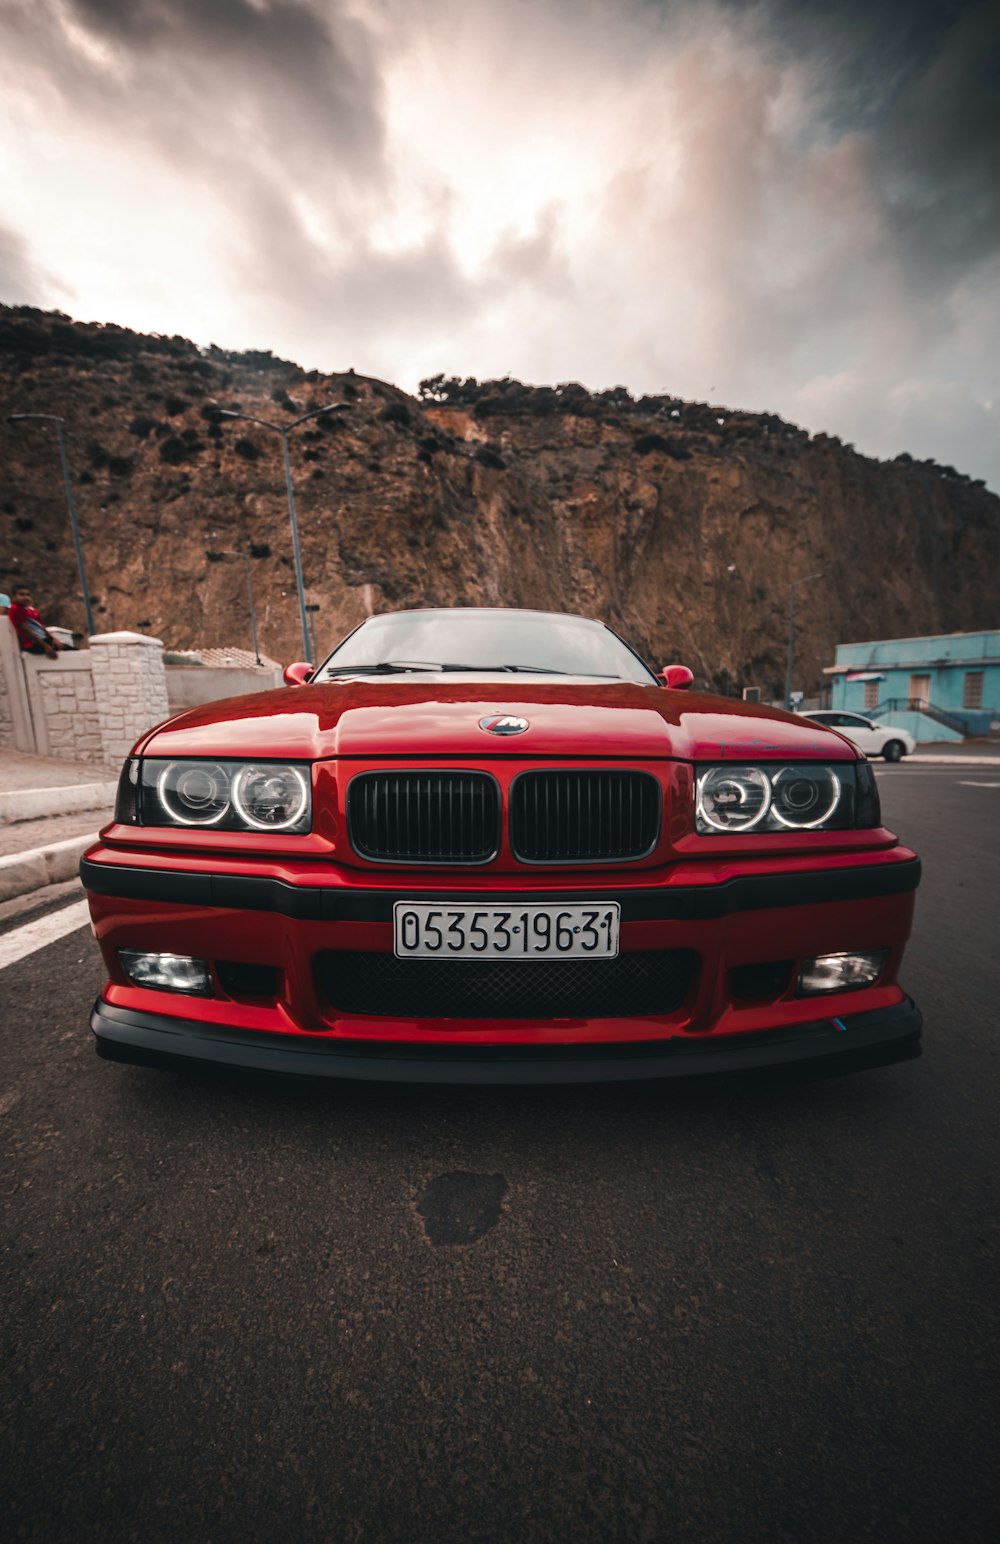 Bmw E36 Pictures | Download Free Images On Unsplash